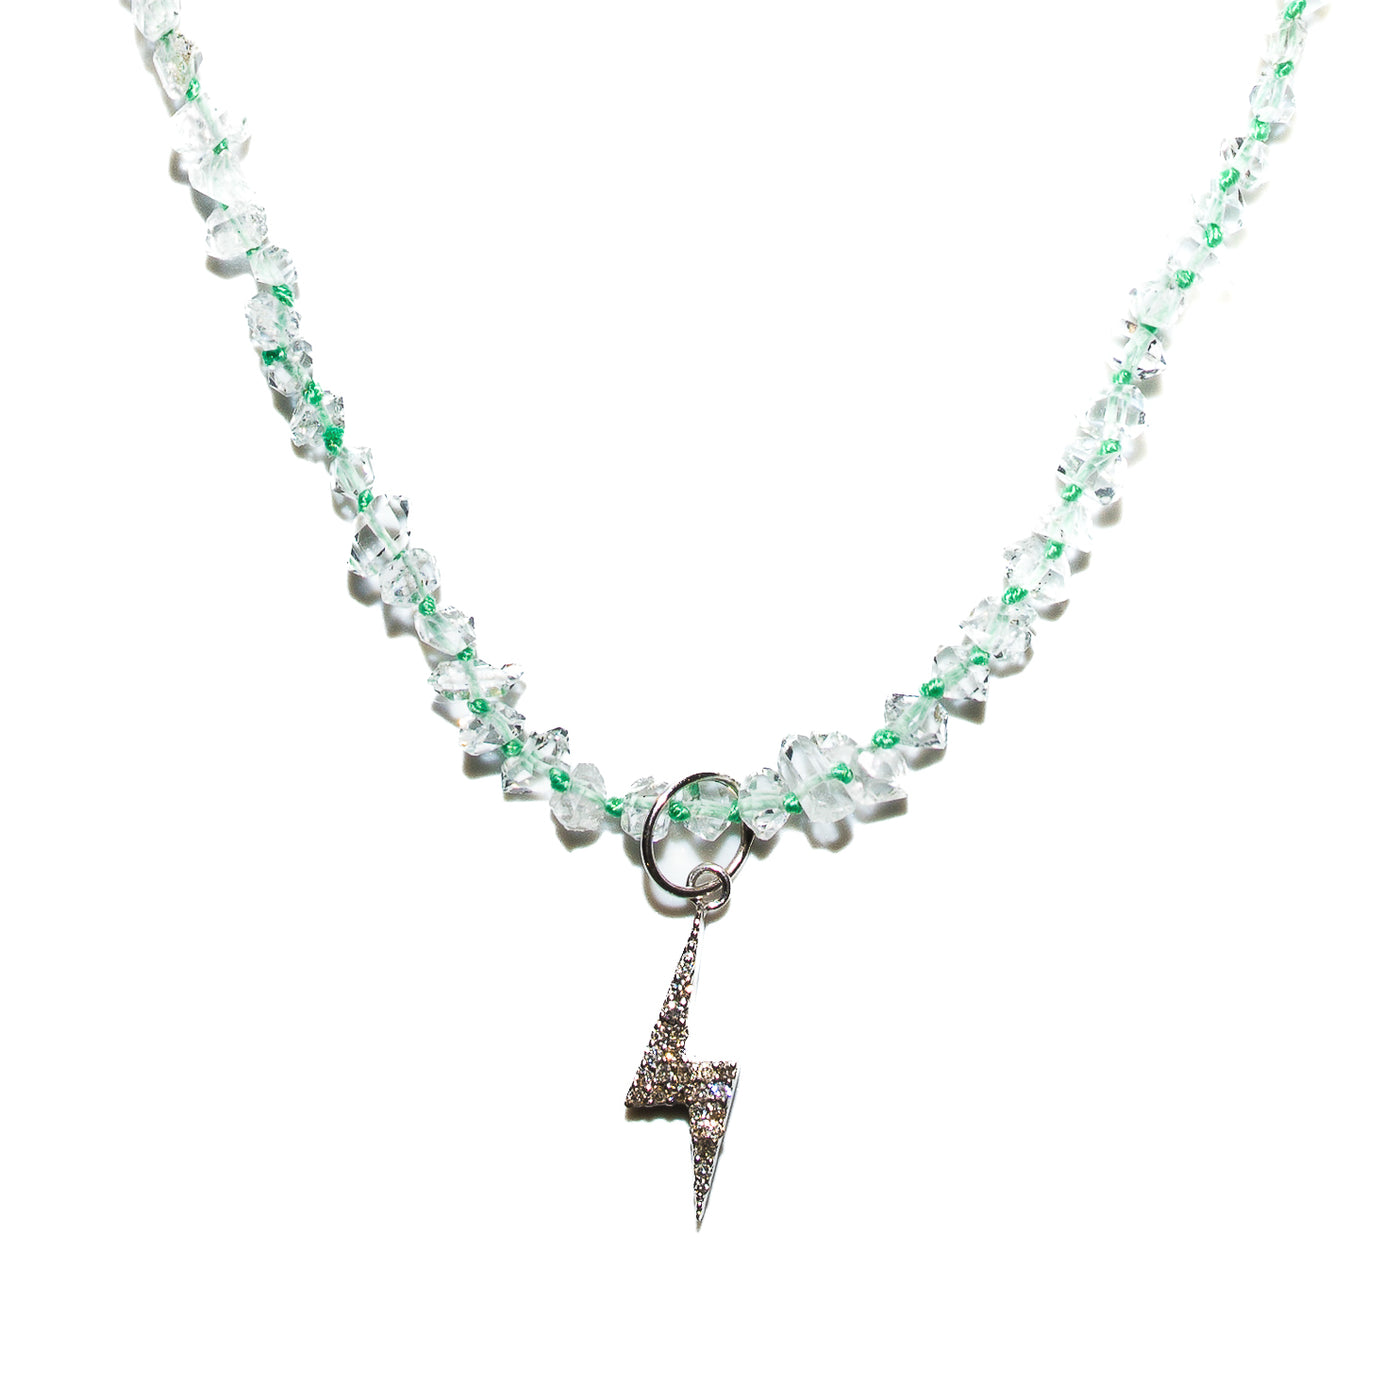 Hackamore Diamond Necklace with Thunder Pendant